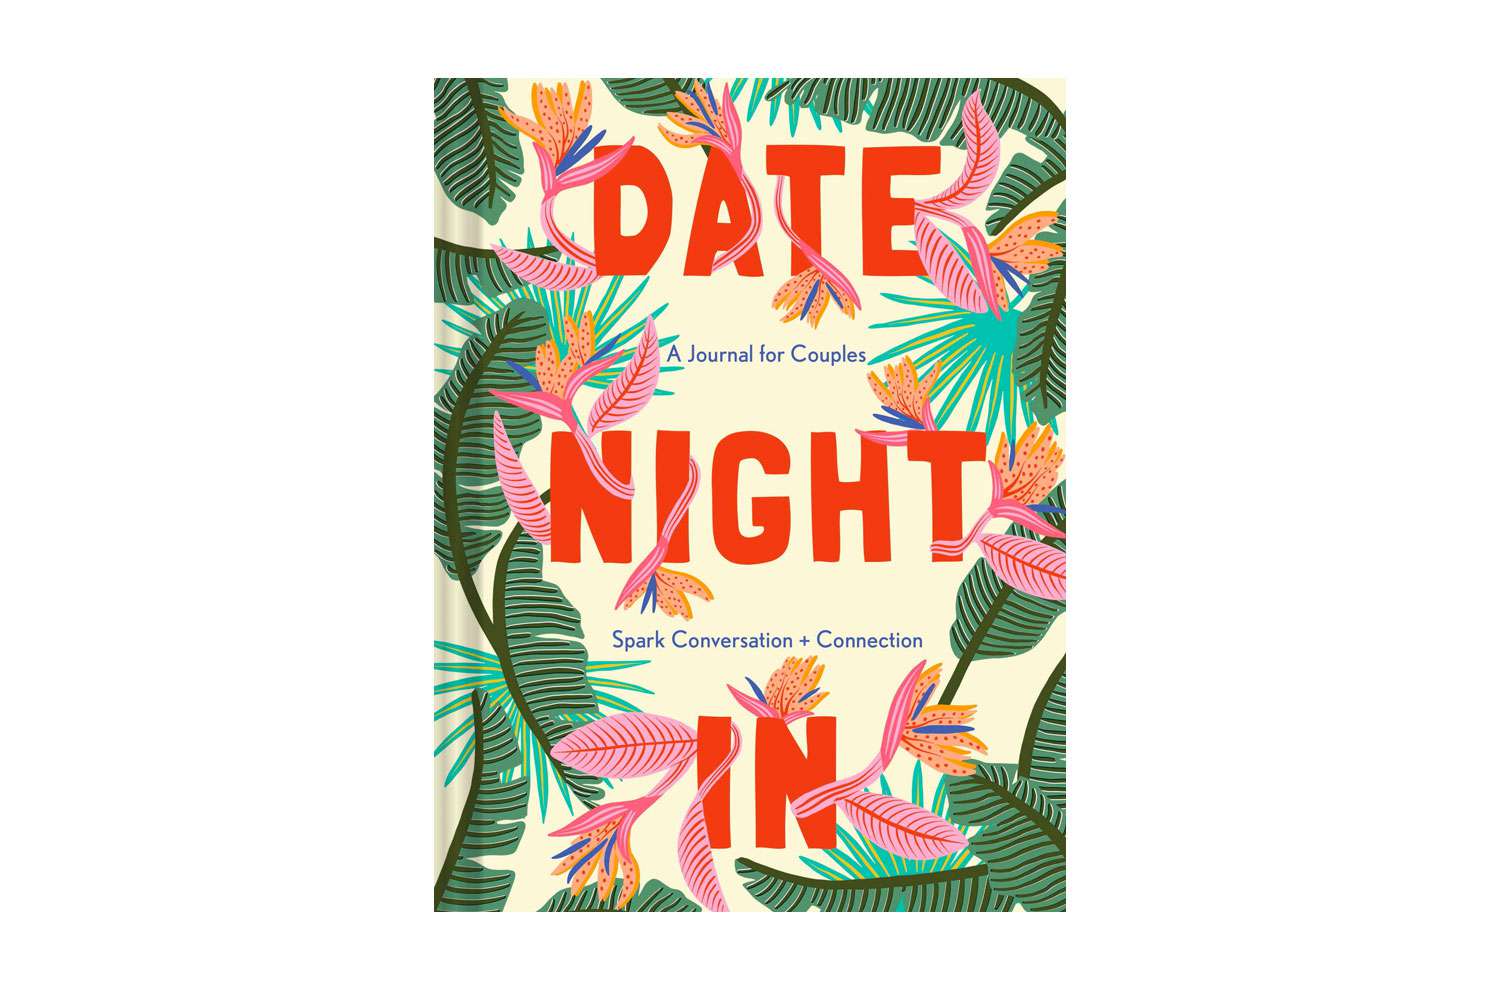 Date Night In: A Journal for Couples Spark Conversation & Connection